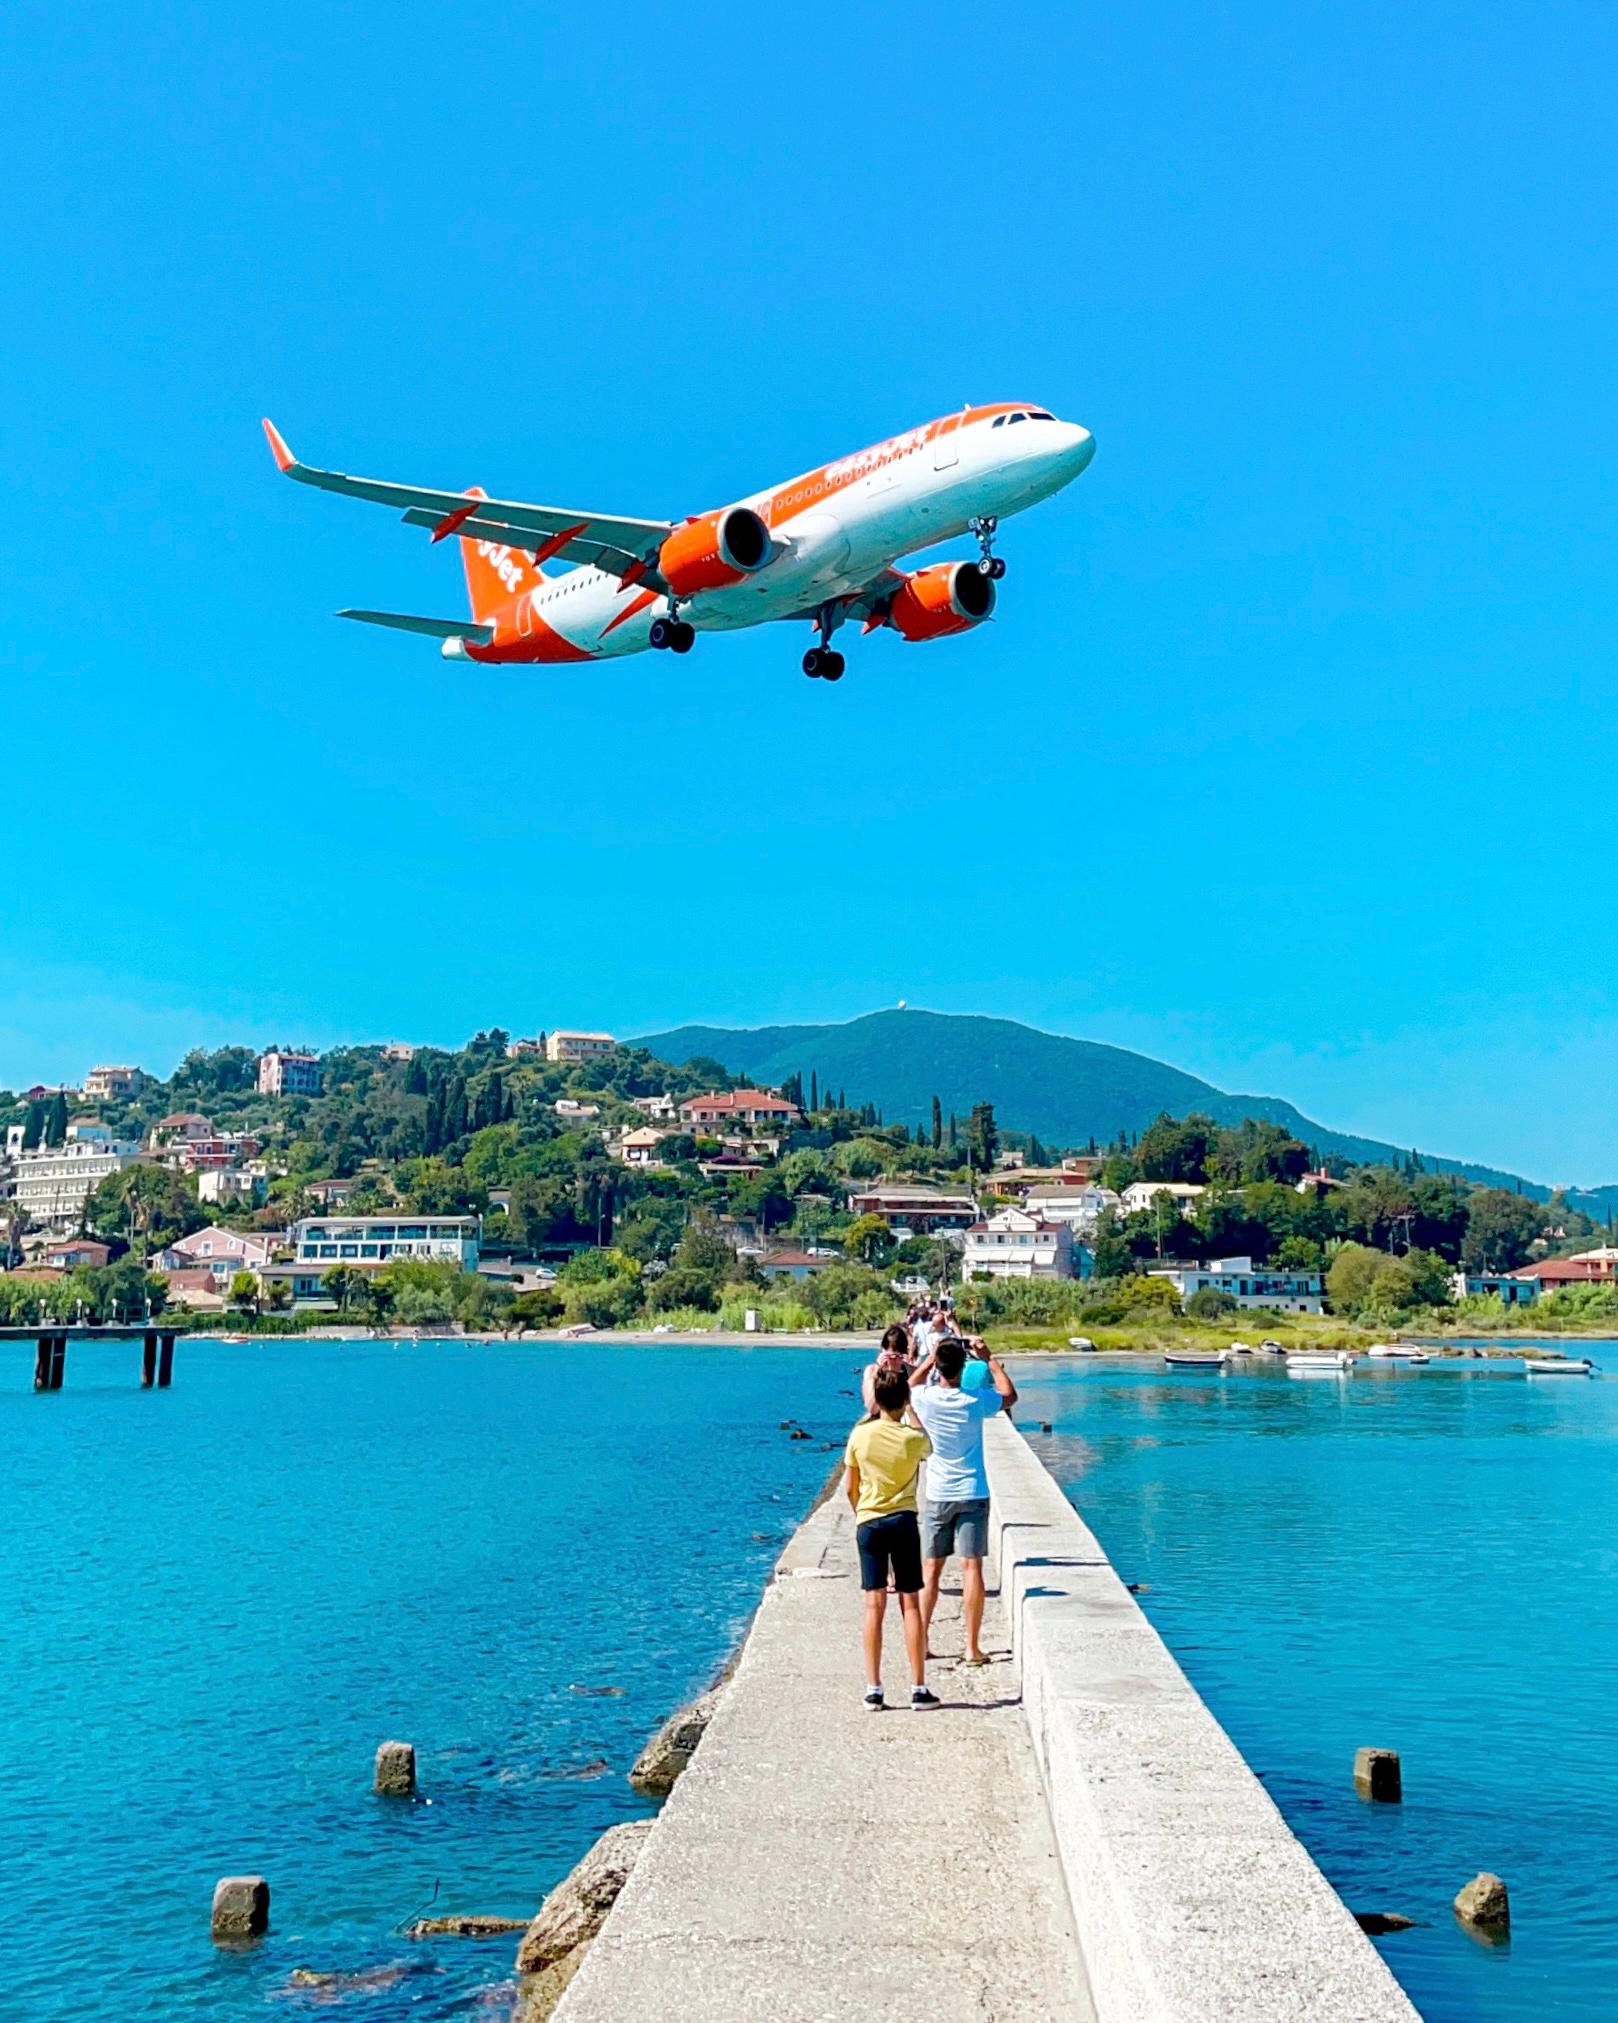 Save up to £200 on Bookings at easyJet